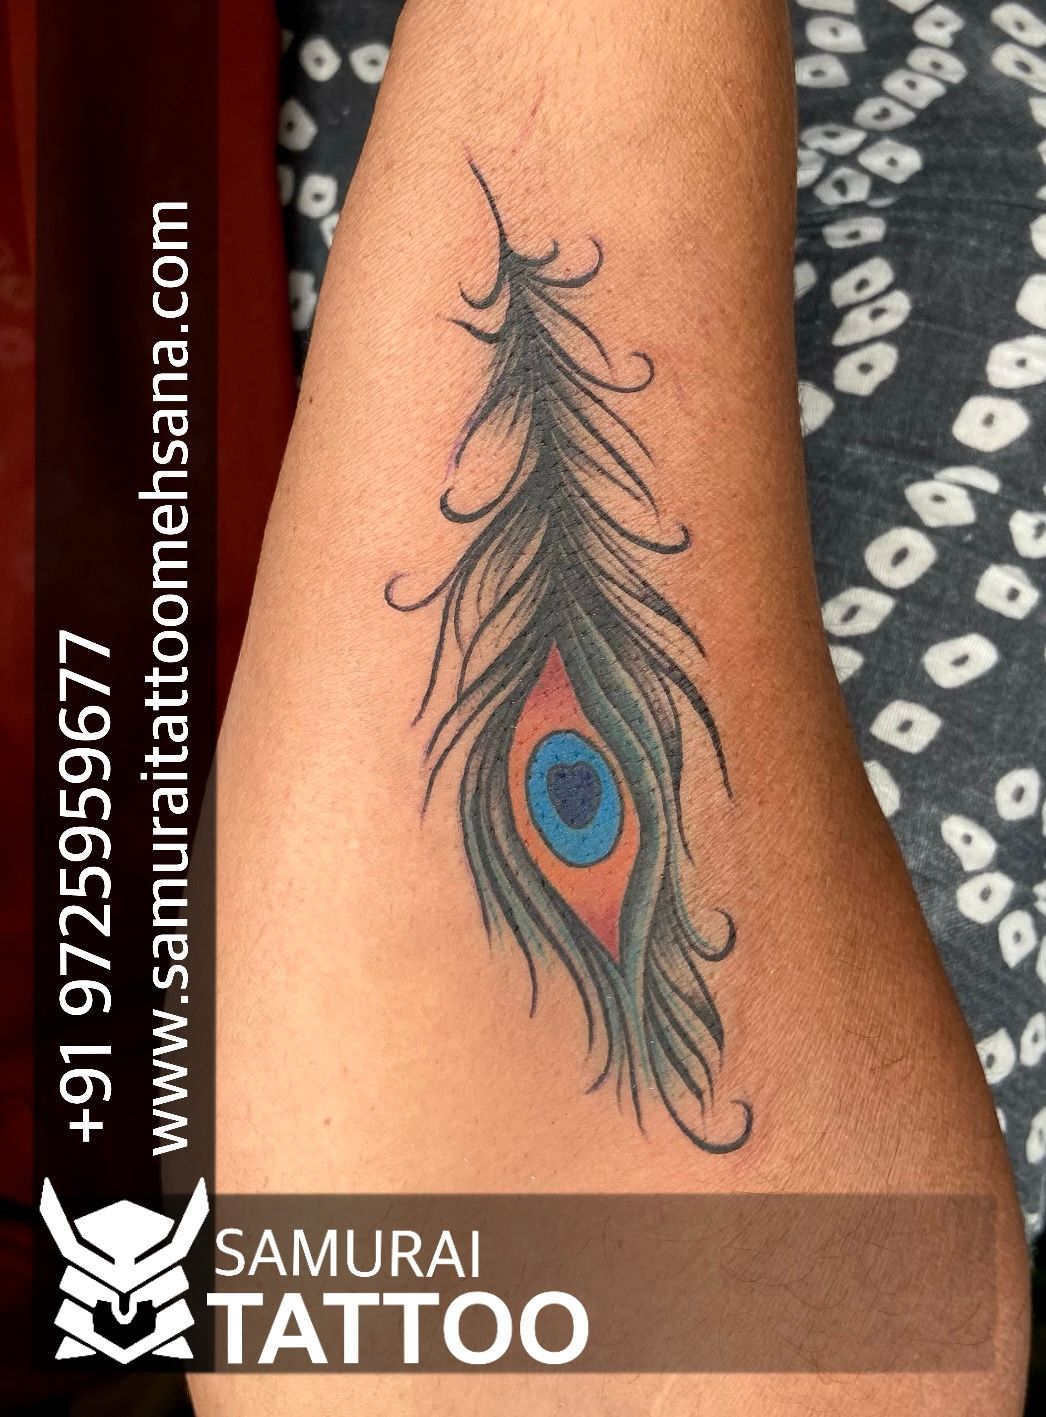 Peacock Feather Tattoo Designs & Ideas for Men and Women